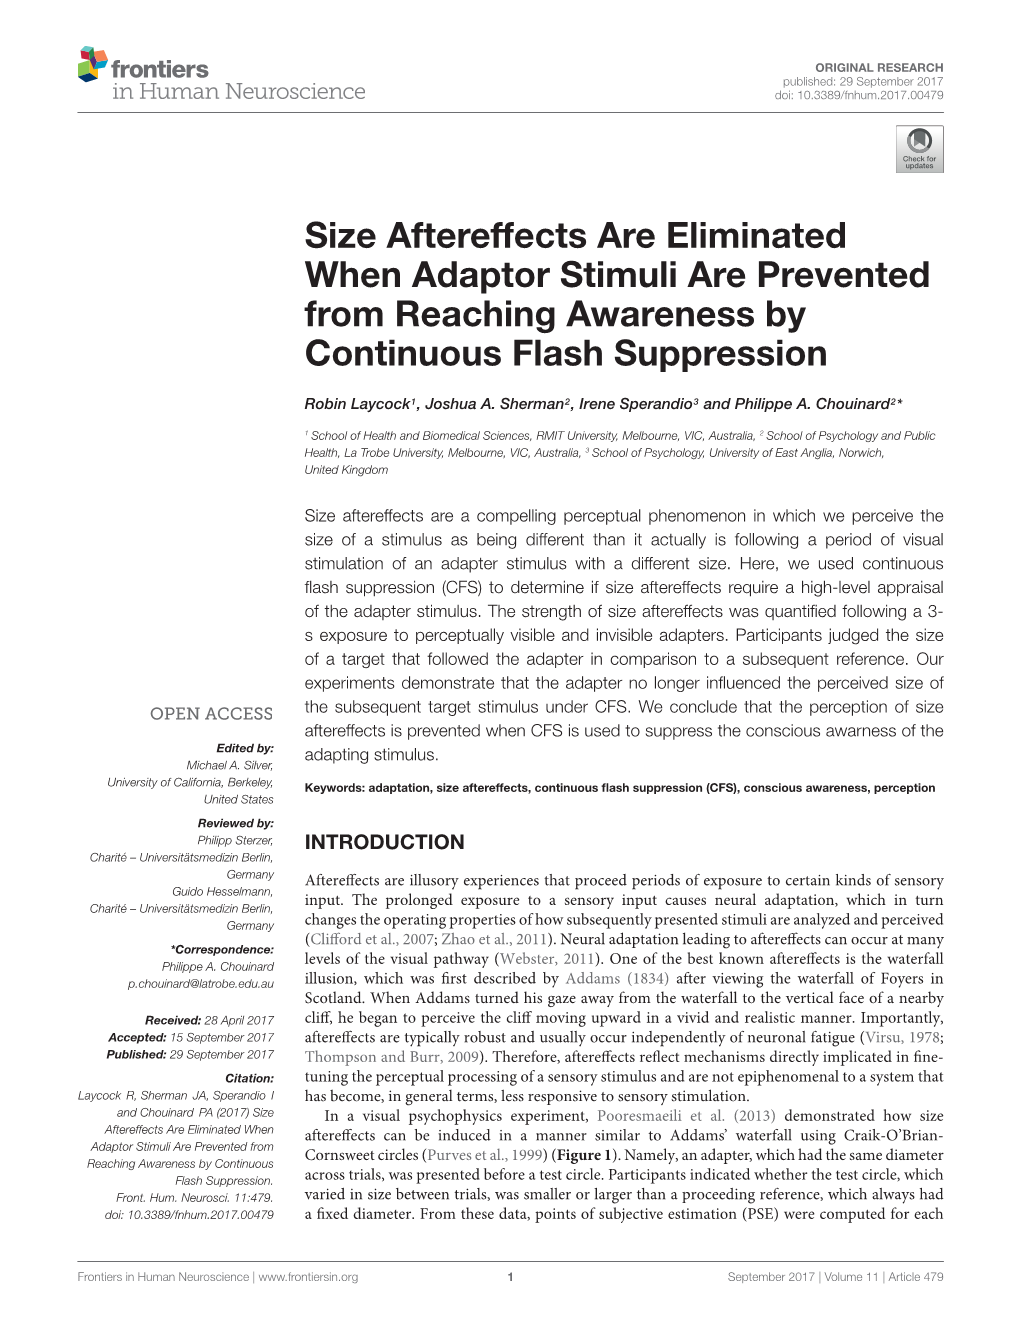 Size Aftereffects Are Eliminated When Adaptor Stimuli Are Prevented from Reaching Awareness by Continuous Flash Suppression